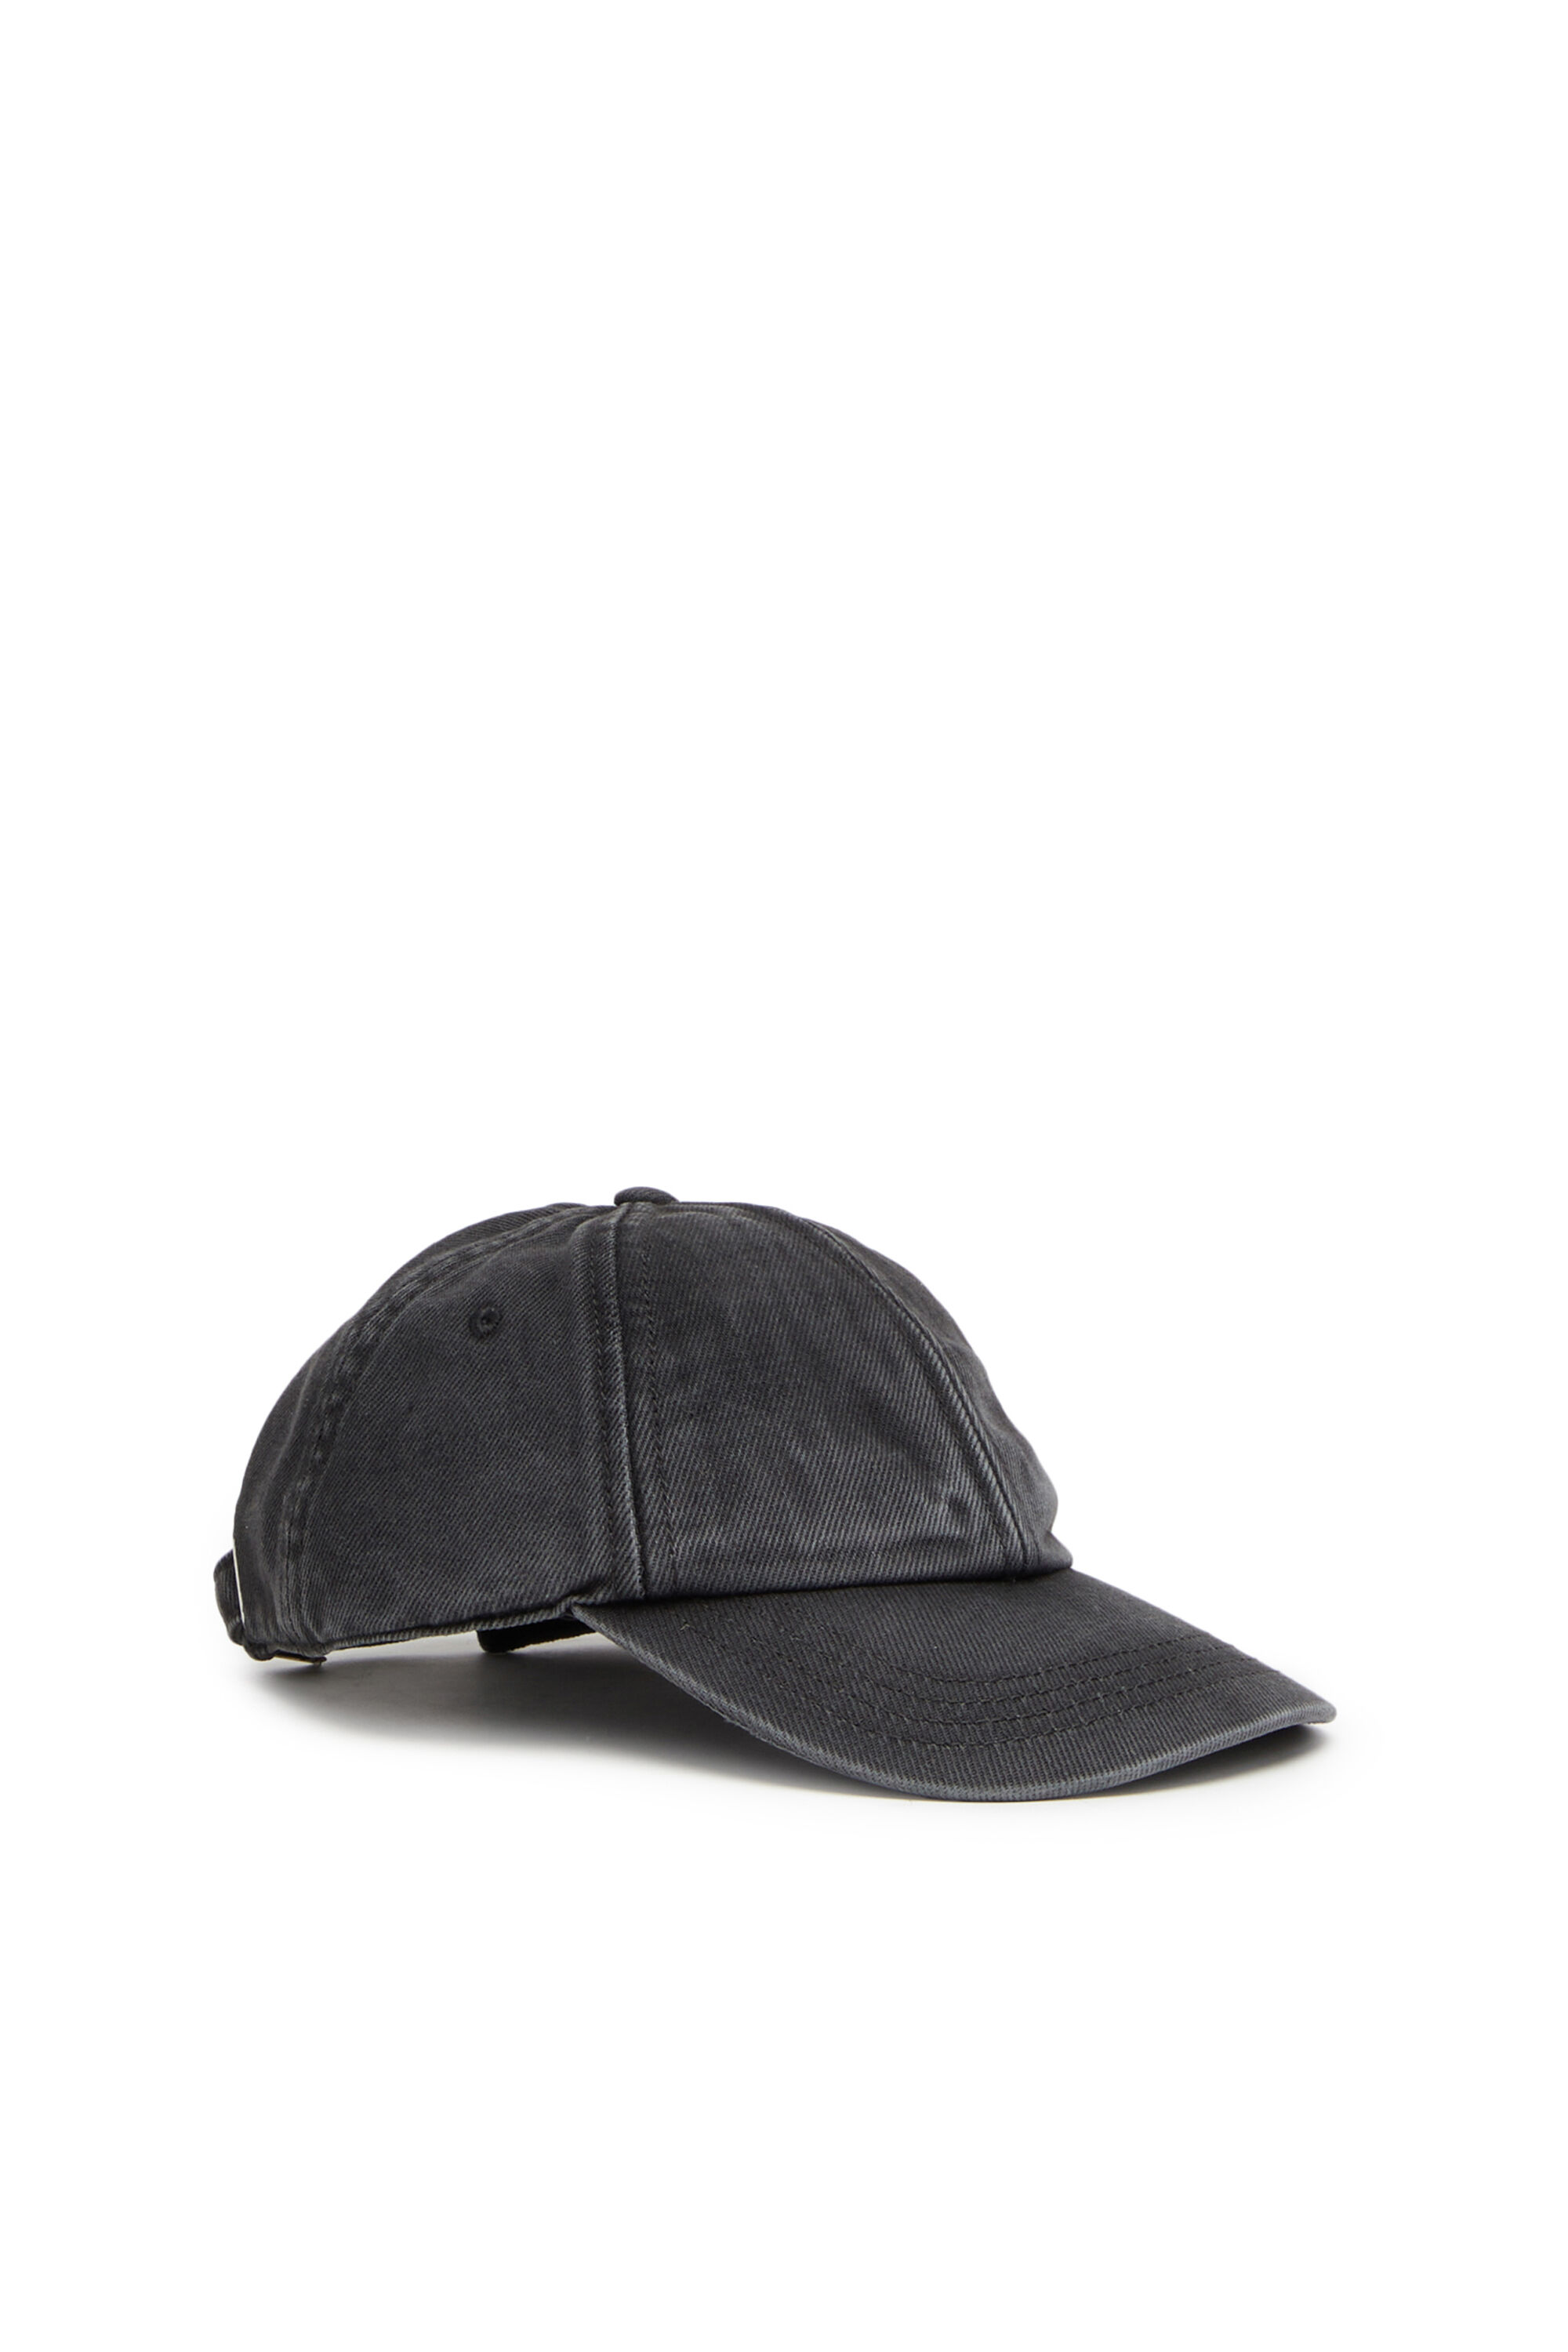 Casquette Baseball Valentin Paille Naturelle -Traclet Reference